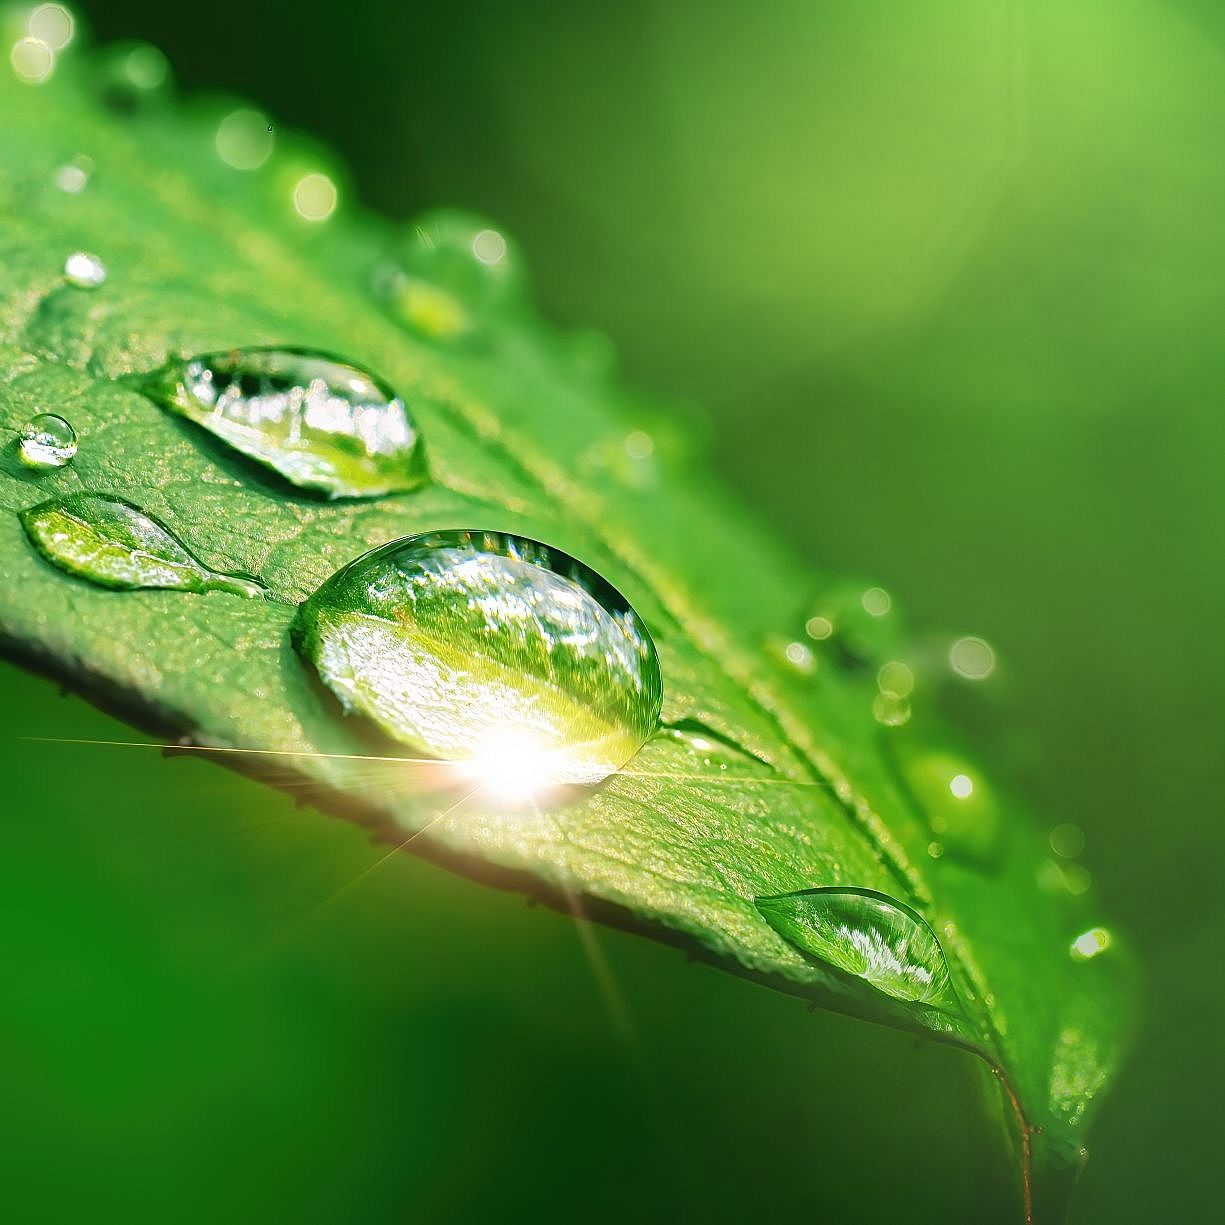 Droplets of water on a green leaf, symbolizing Rieter's sustainability strategy.